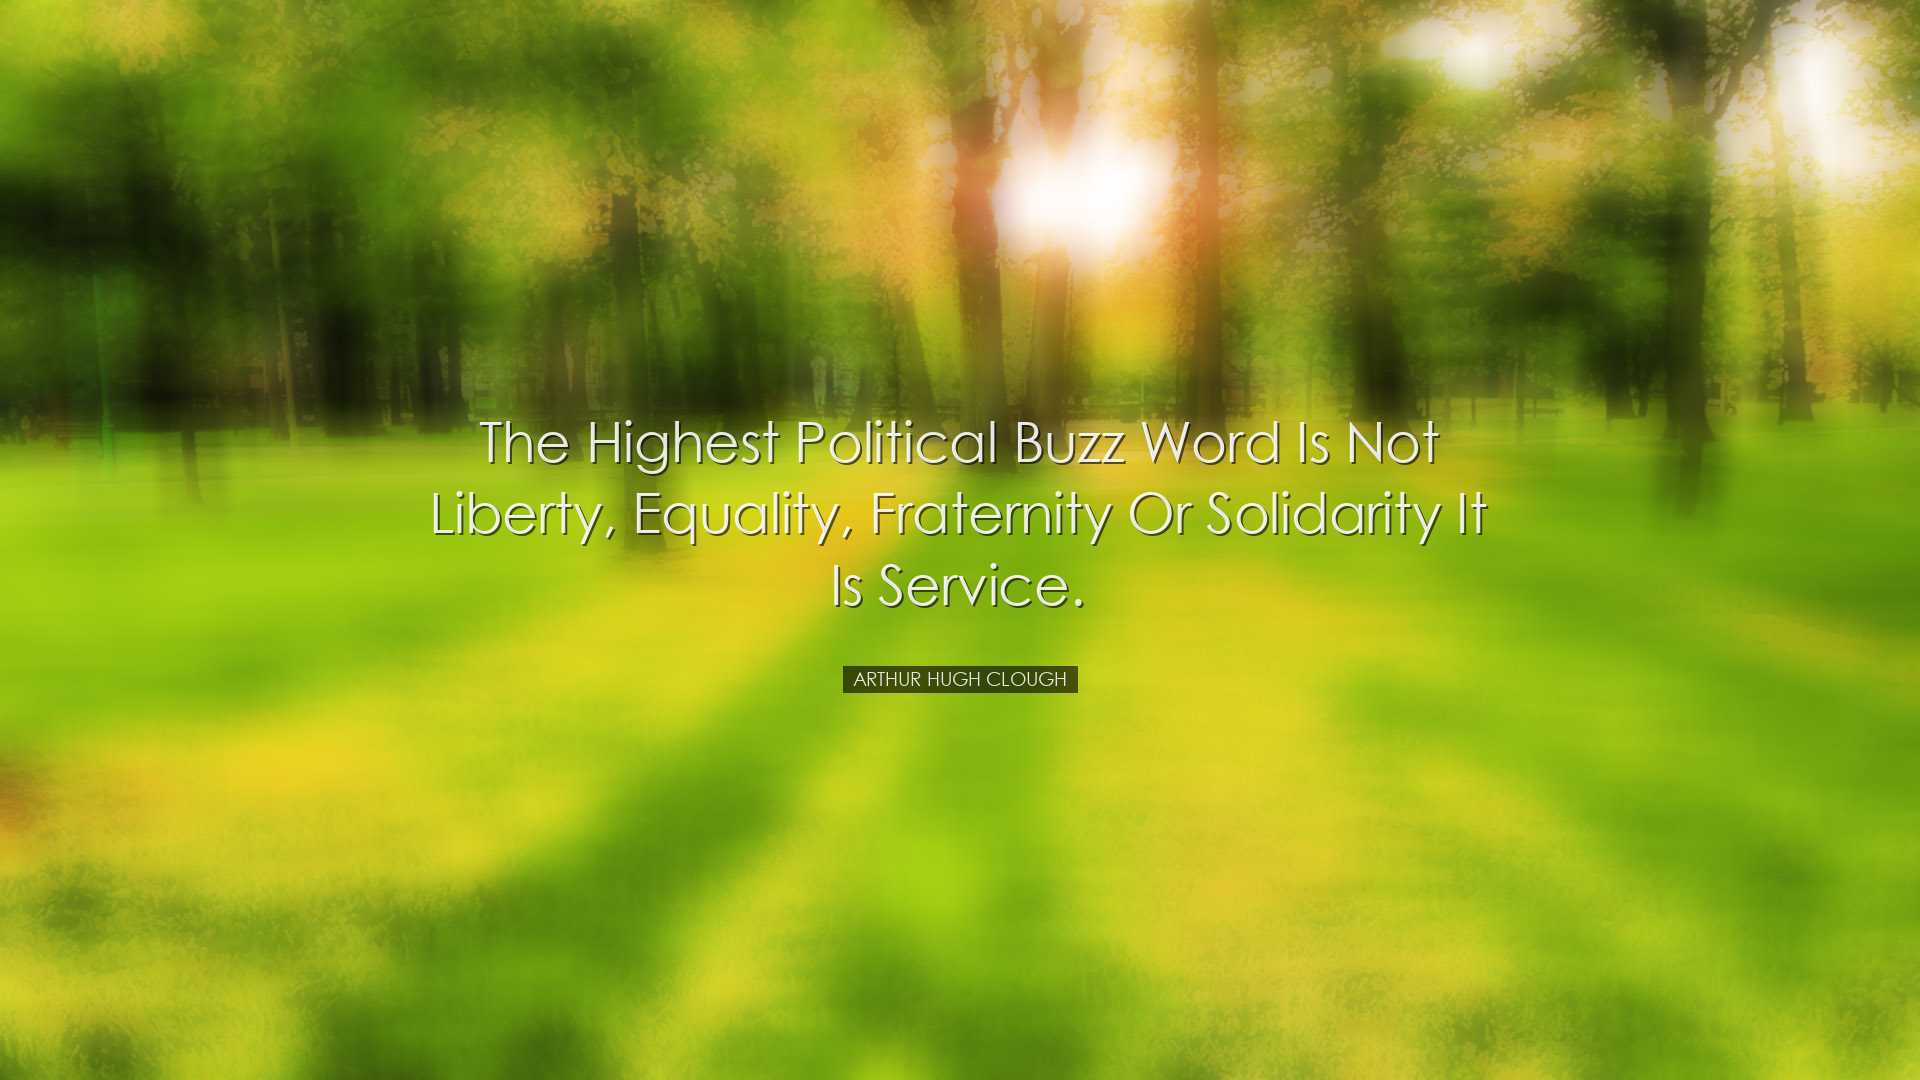 The highest political buzz word is not liberty, equality, fraterni